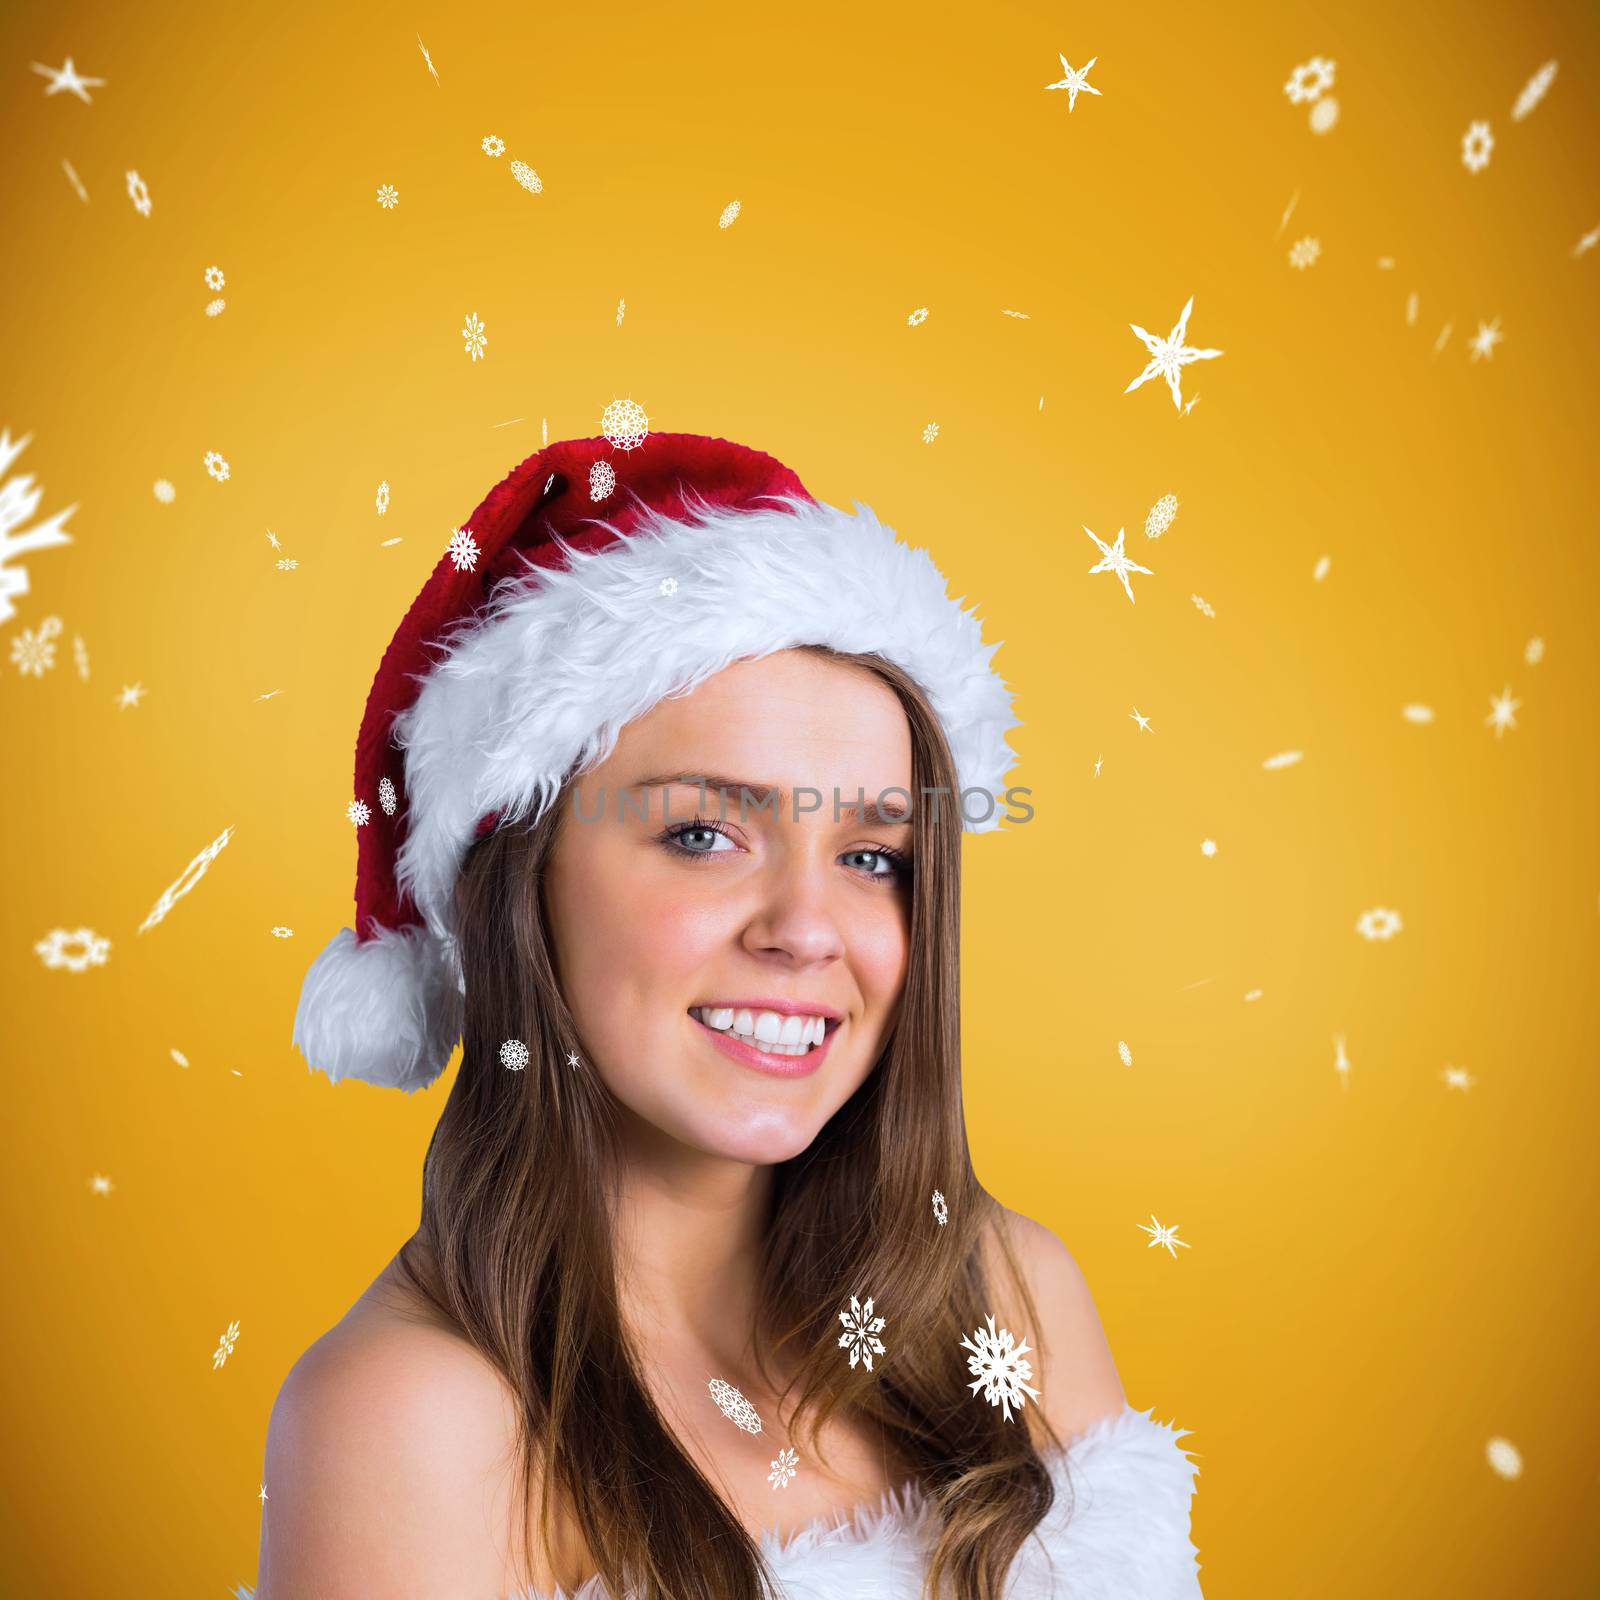 Sexy santa girl smiling at camera against yellow background with vignette